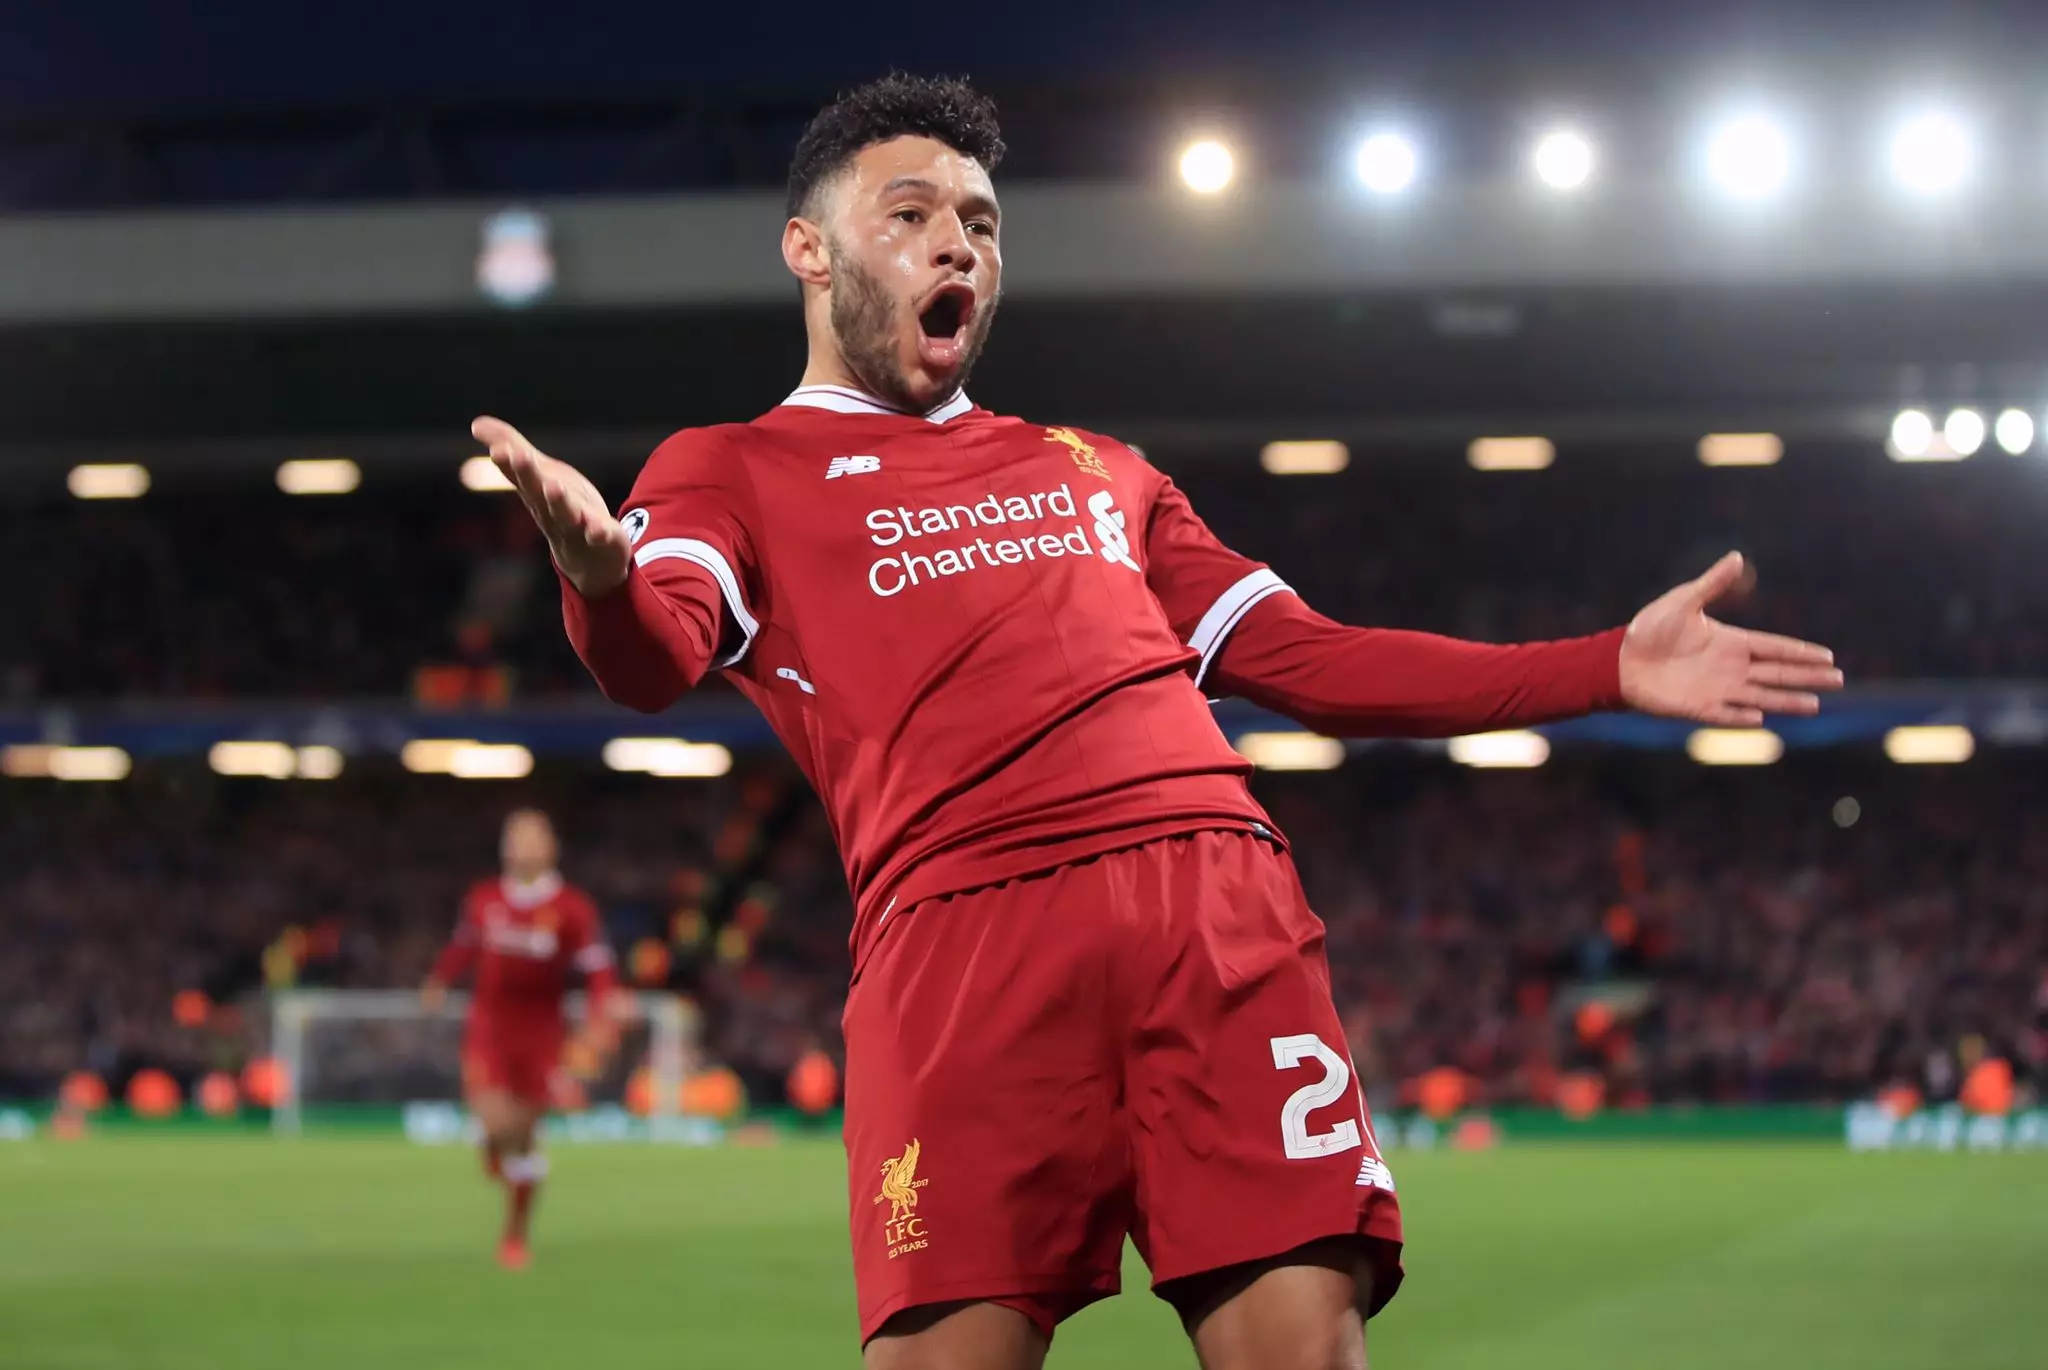 Oxlade-Chamberlain's return will add even more competition to Liverpool's team. Image: PA